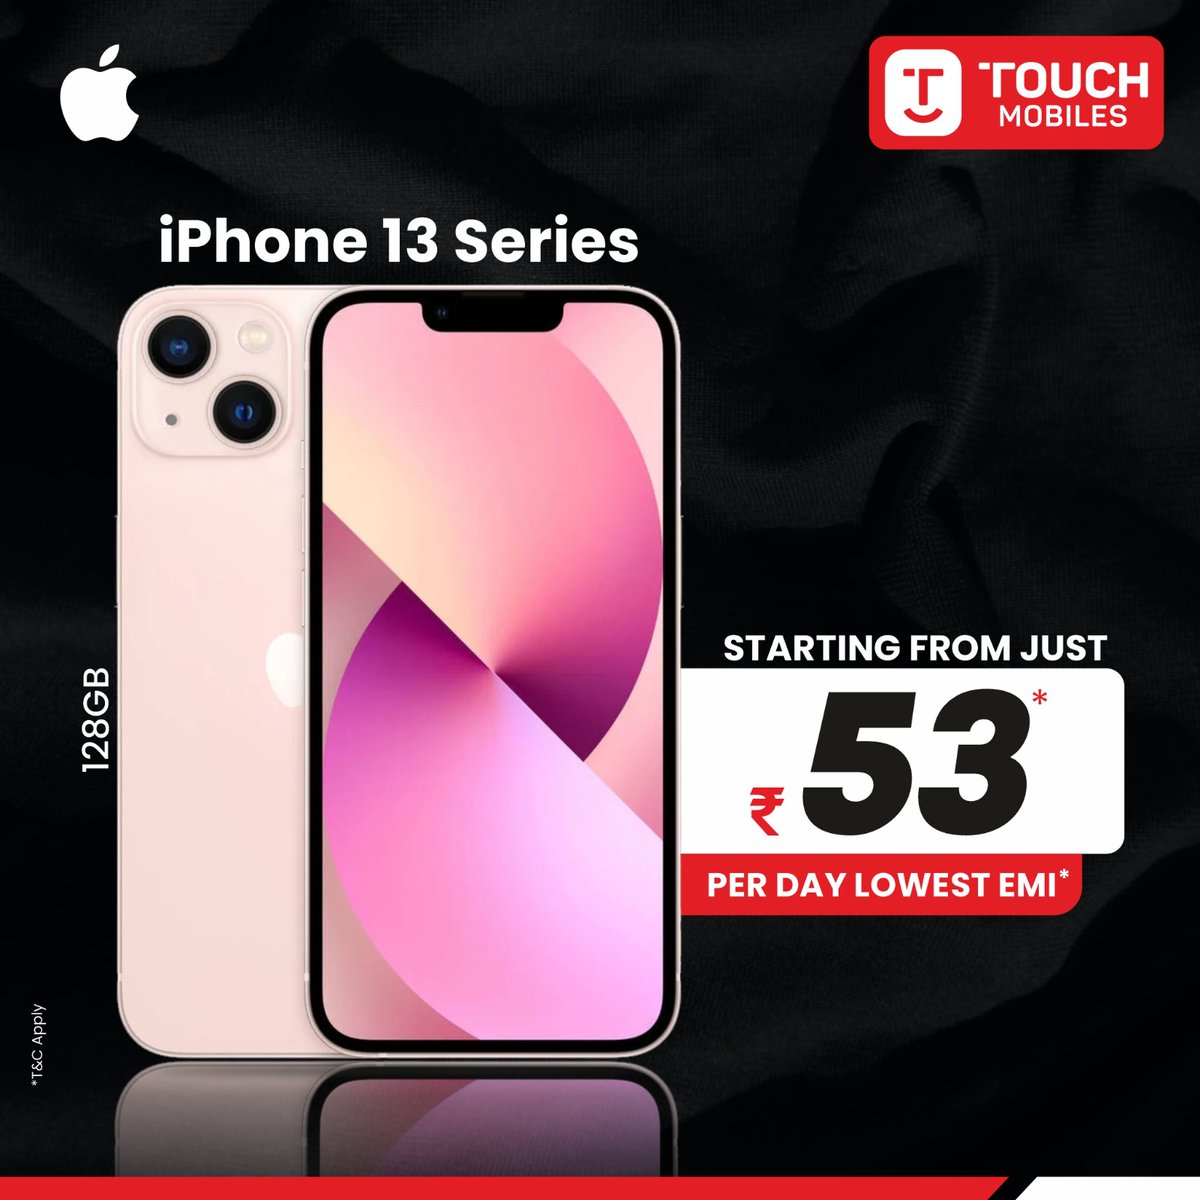 Experience the incredible iPhone 13 series at an unbeatable price! Own this masterpiece starting from just Rs. 53 per day, lowest EMI, and seize every moment with the iPhone 13! Don't miss out on this special offer! 🥳 #iPhone13 #UnbeatablePrices #seizethemoment #iPhone13series